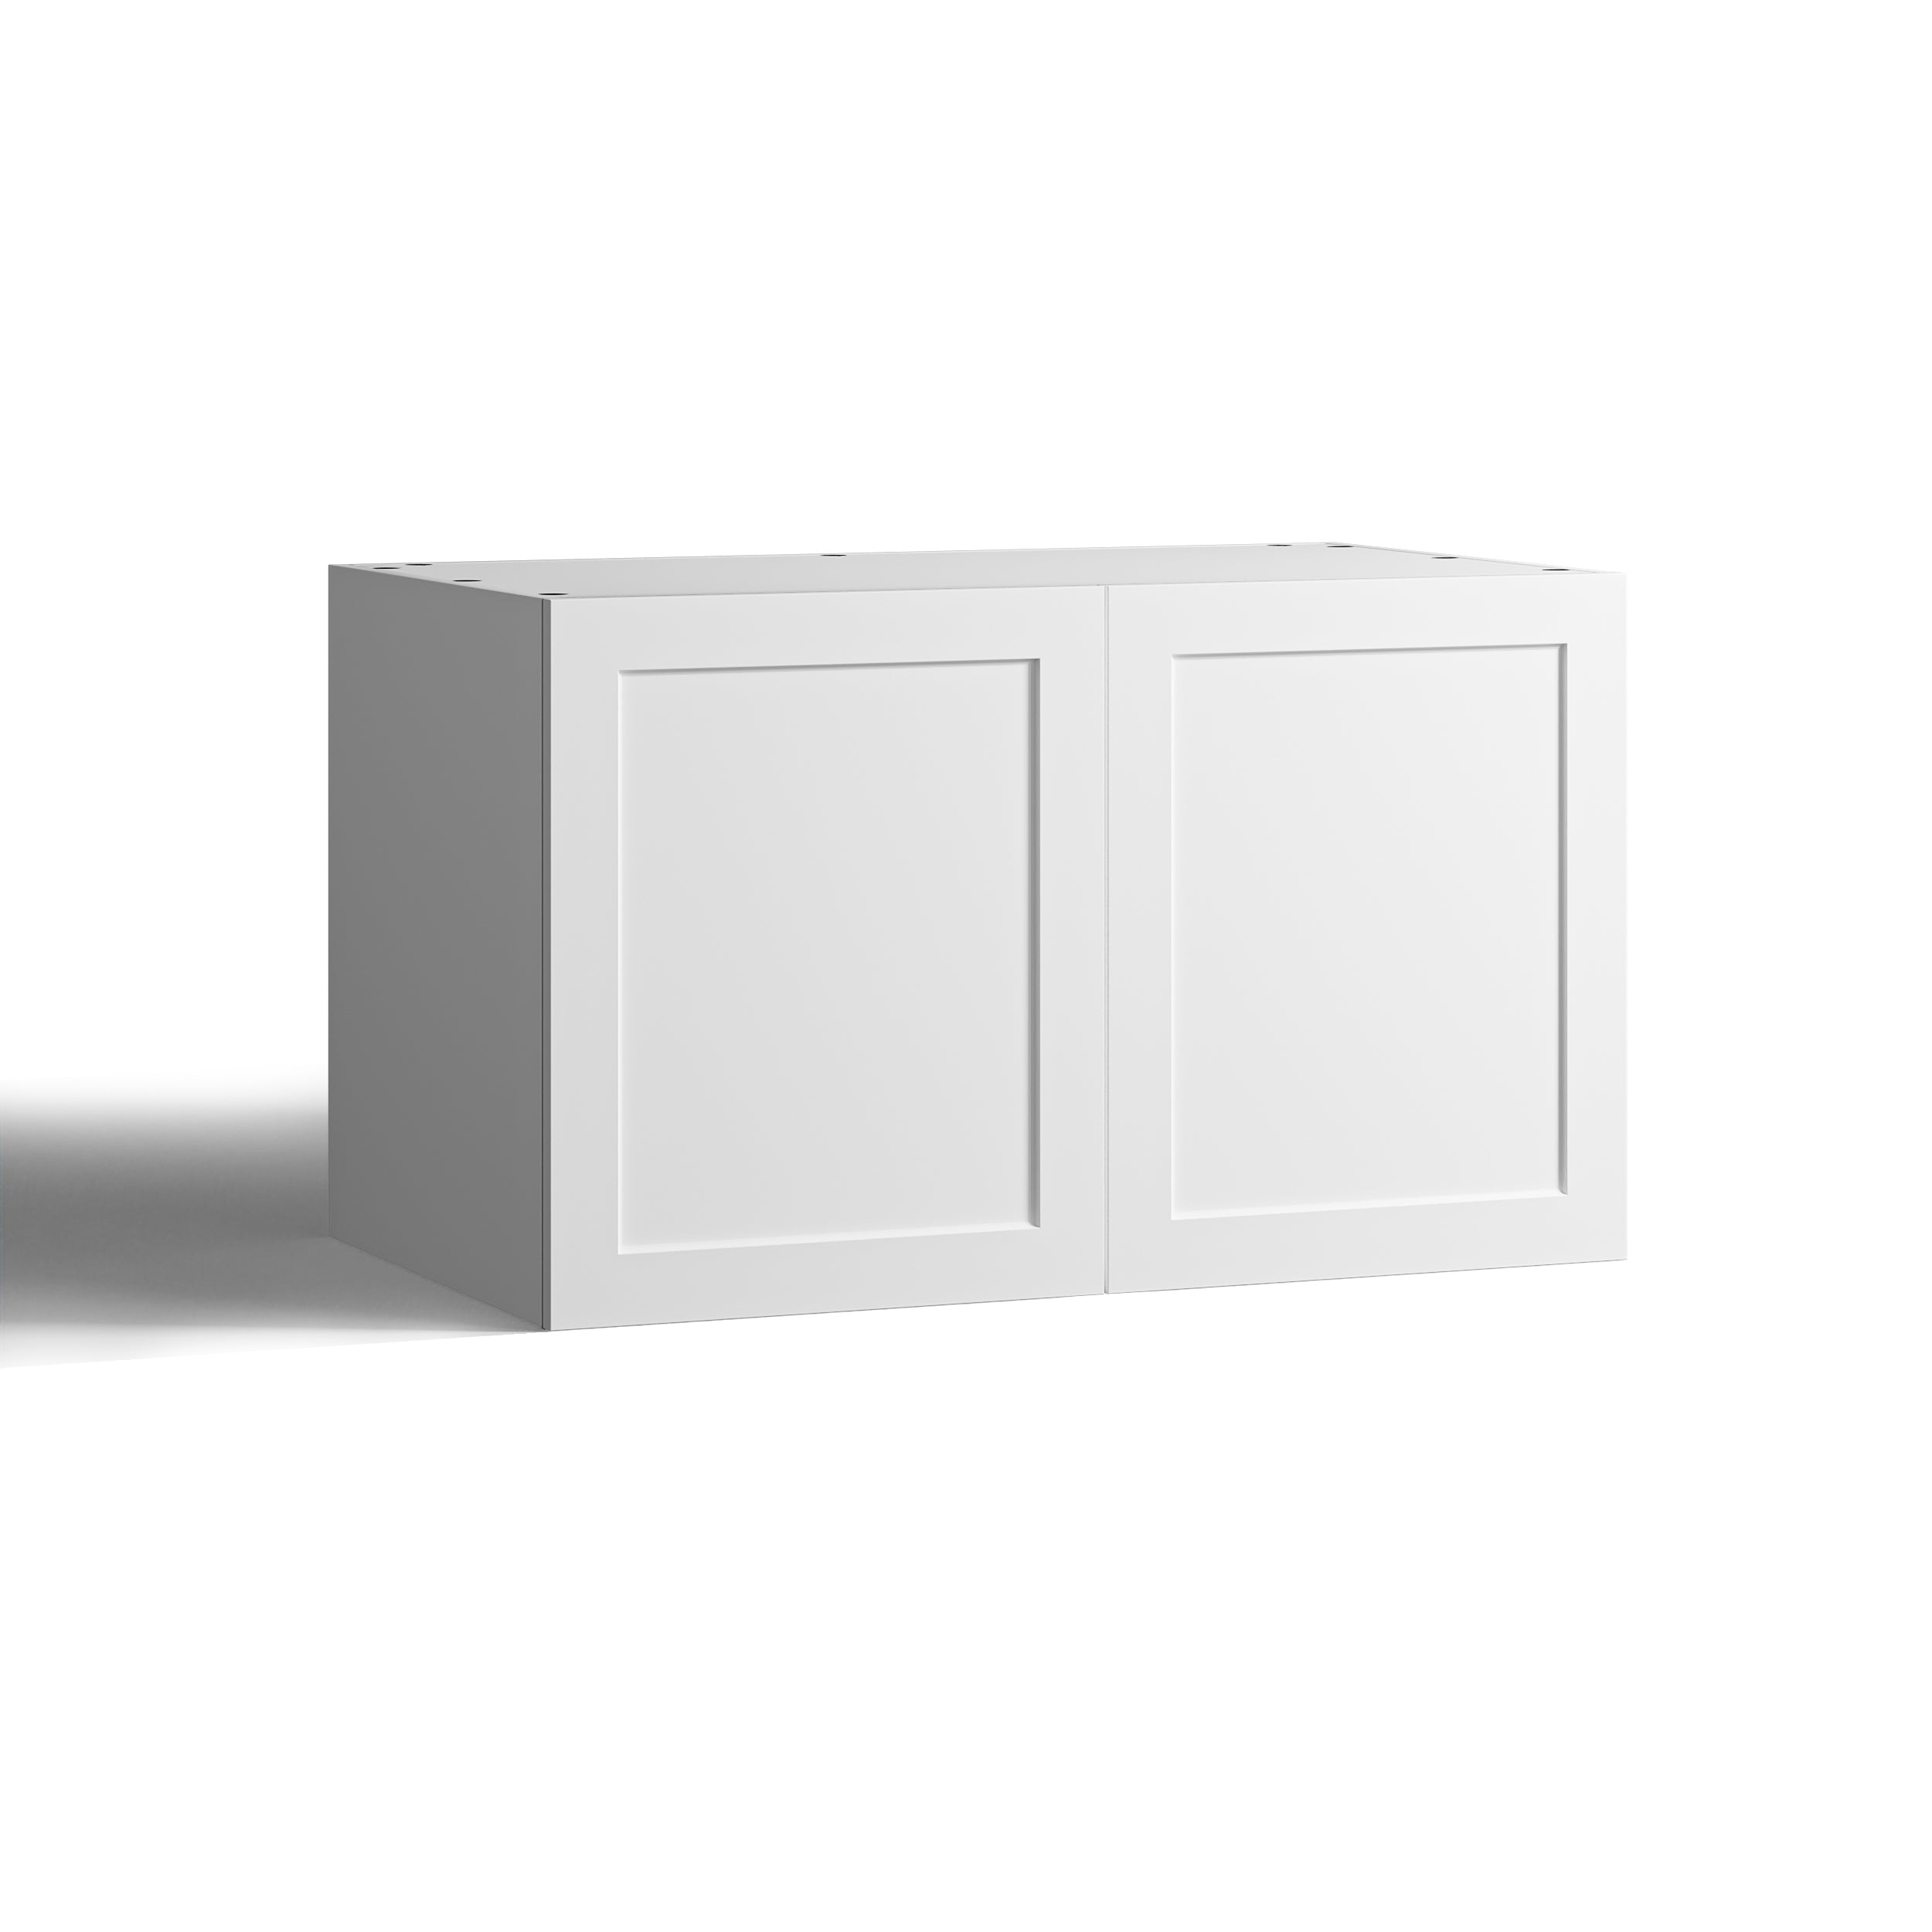 100x60 - Cabinet (58cm D) w 2 Doors - French Shaker - PAX